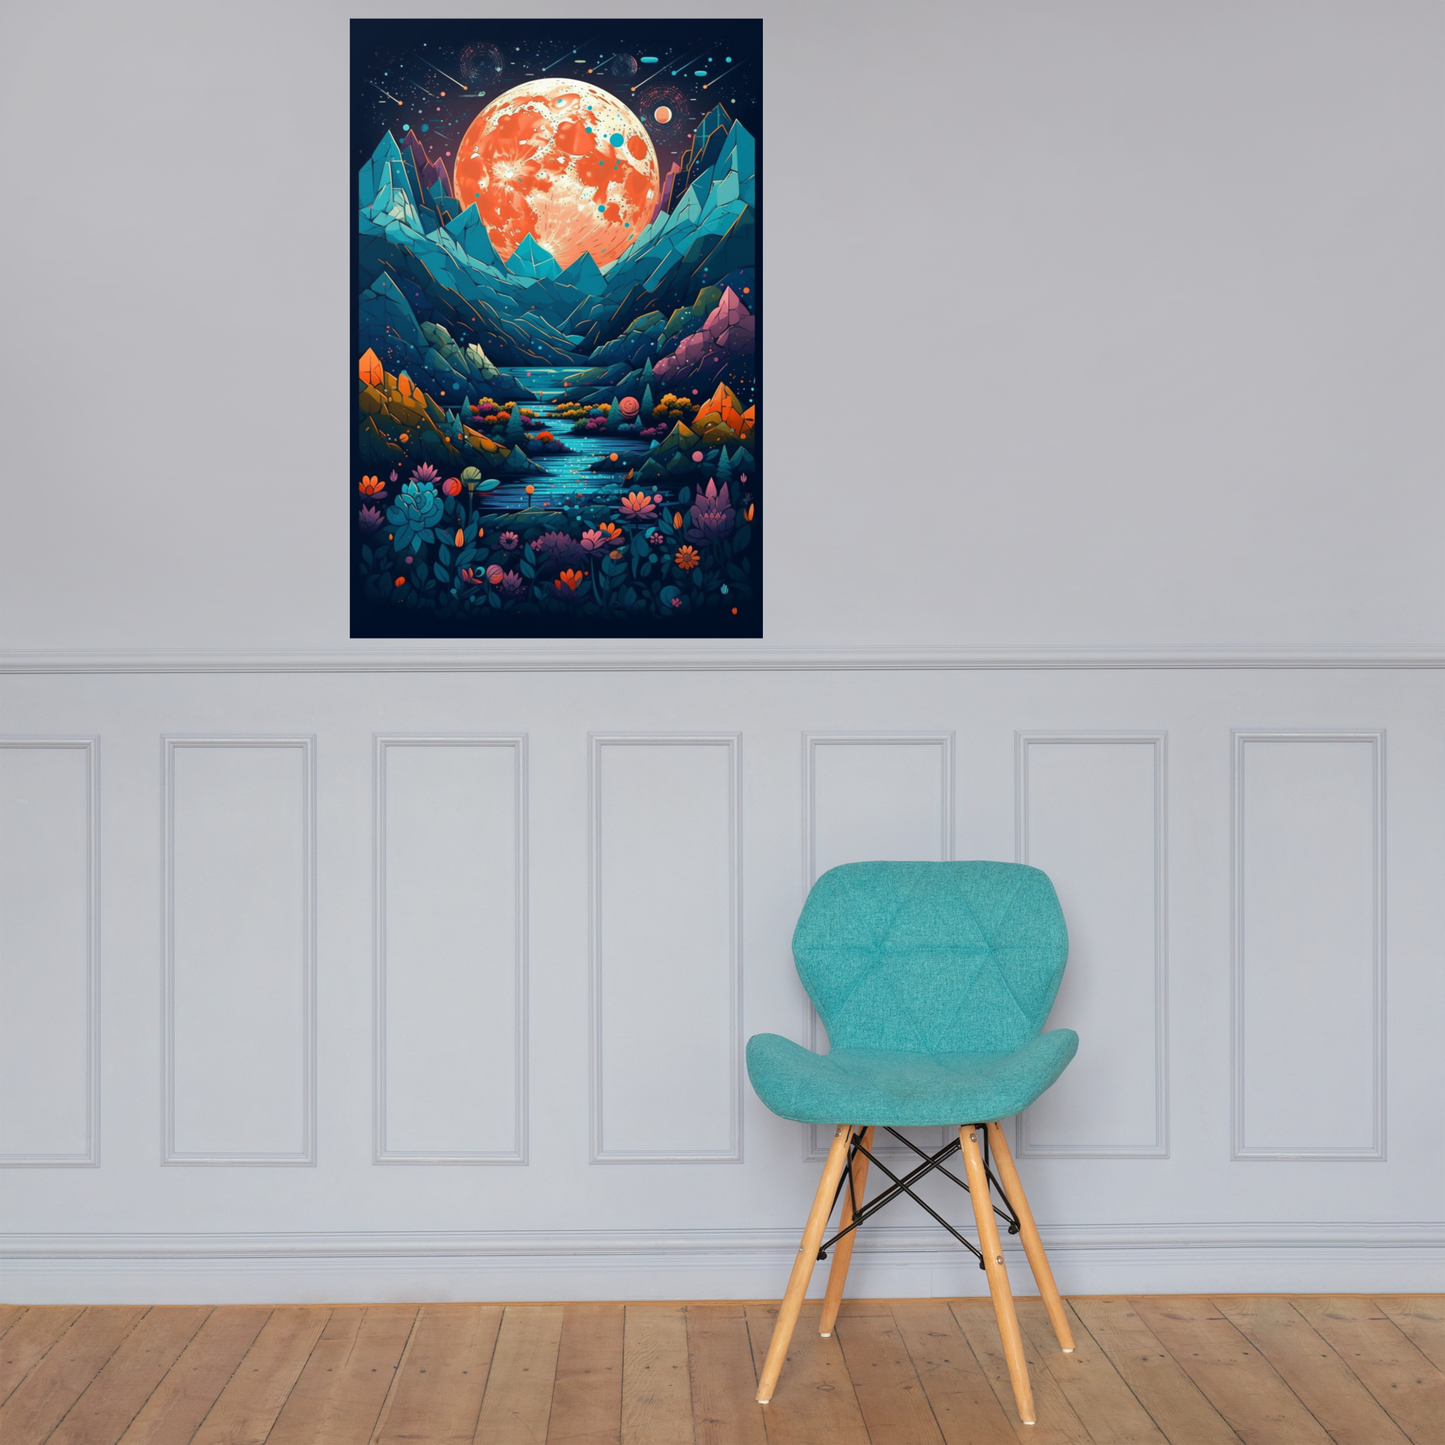 Stunning Extraterrestrial Landscapes on Wall Poster